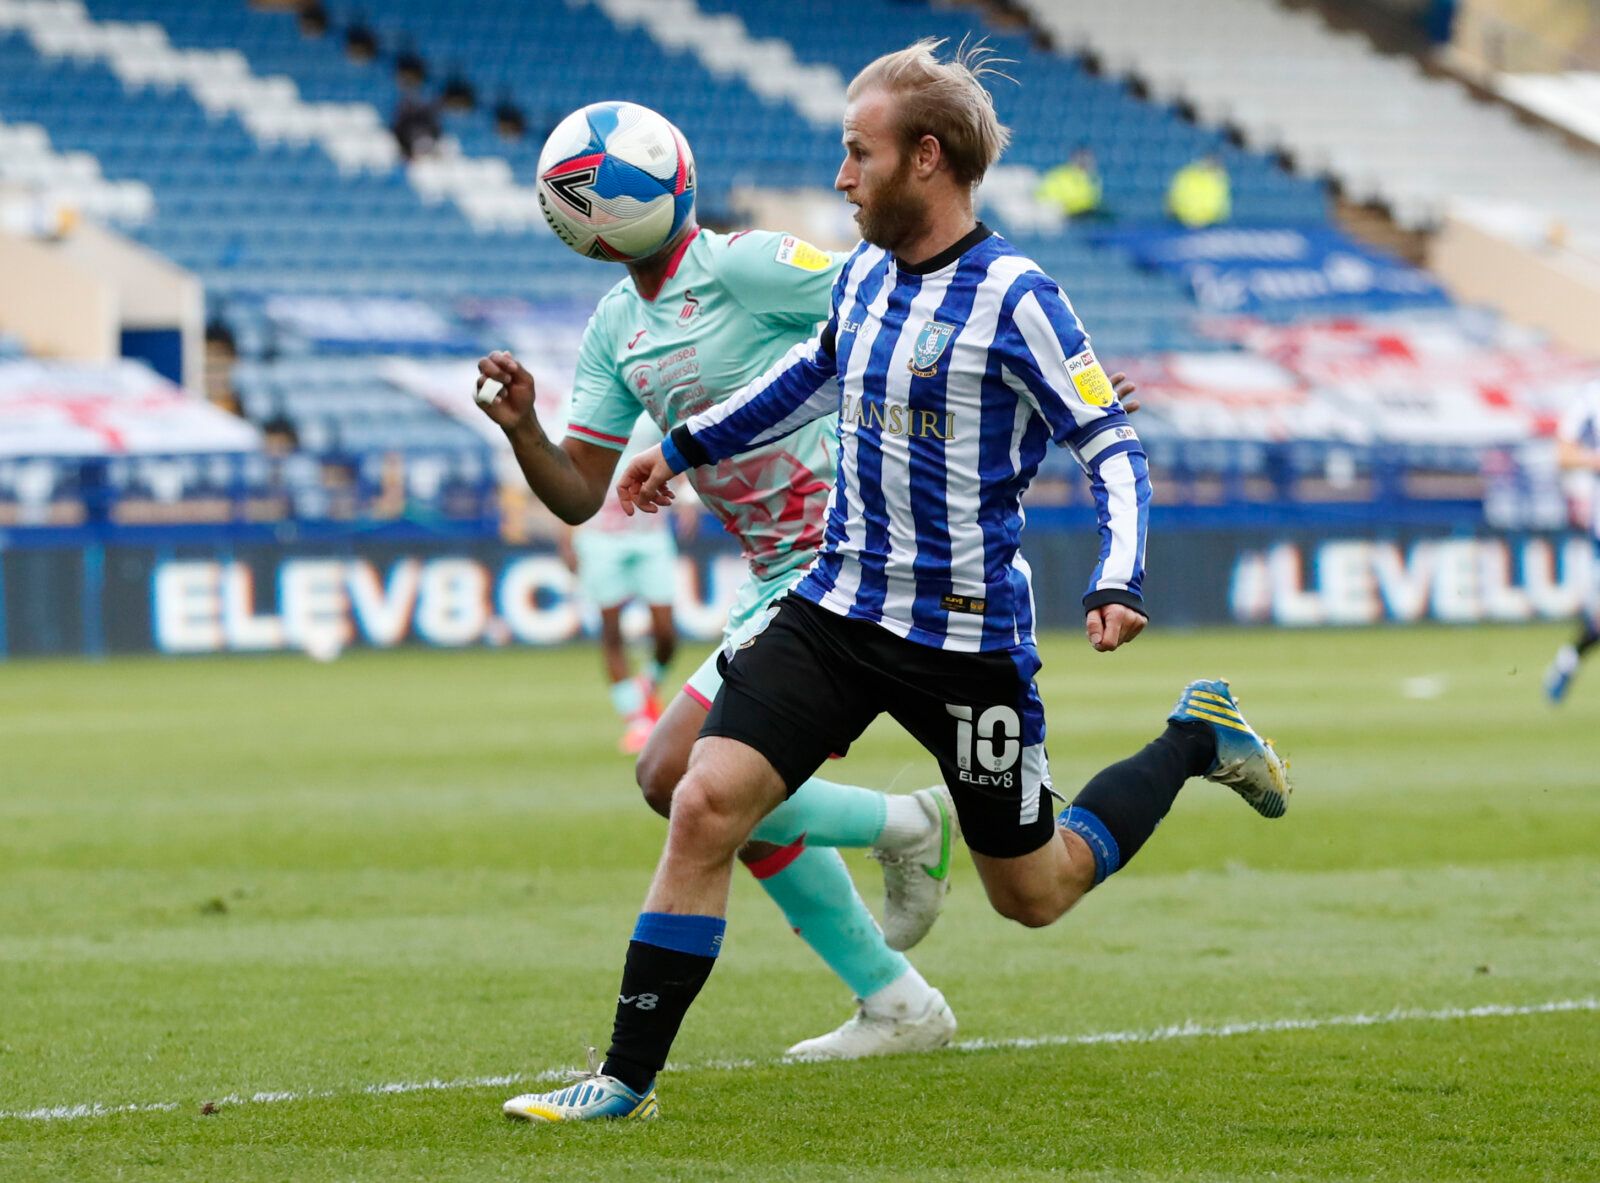 Soccer Football - Championship - Sheffield Wednesday v Swansea City - Hillsborough, Sheffield, Britain - April 13, 2021 Sheffield Wednesday's Barry Bannan in action with Swansea City's Andre Ayew Action Images/Andrew Boyers EDITORIAL USE ONLY. No use with unauthorized audio, video, data, fixture lists, club/league logos or 'live' services. Online in-match use limited to 75 images, no video emulation. No use in betting, games or single club /league/player publications.  Please contact your accoun